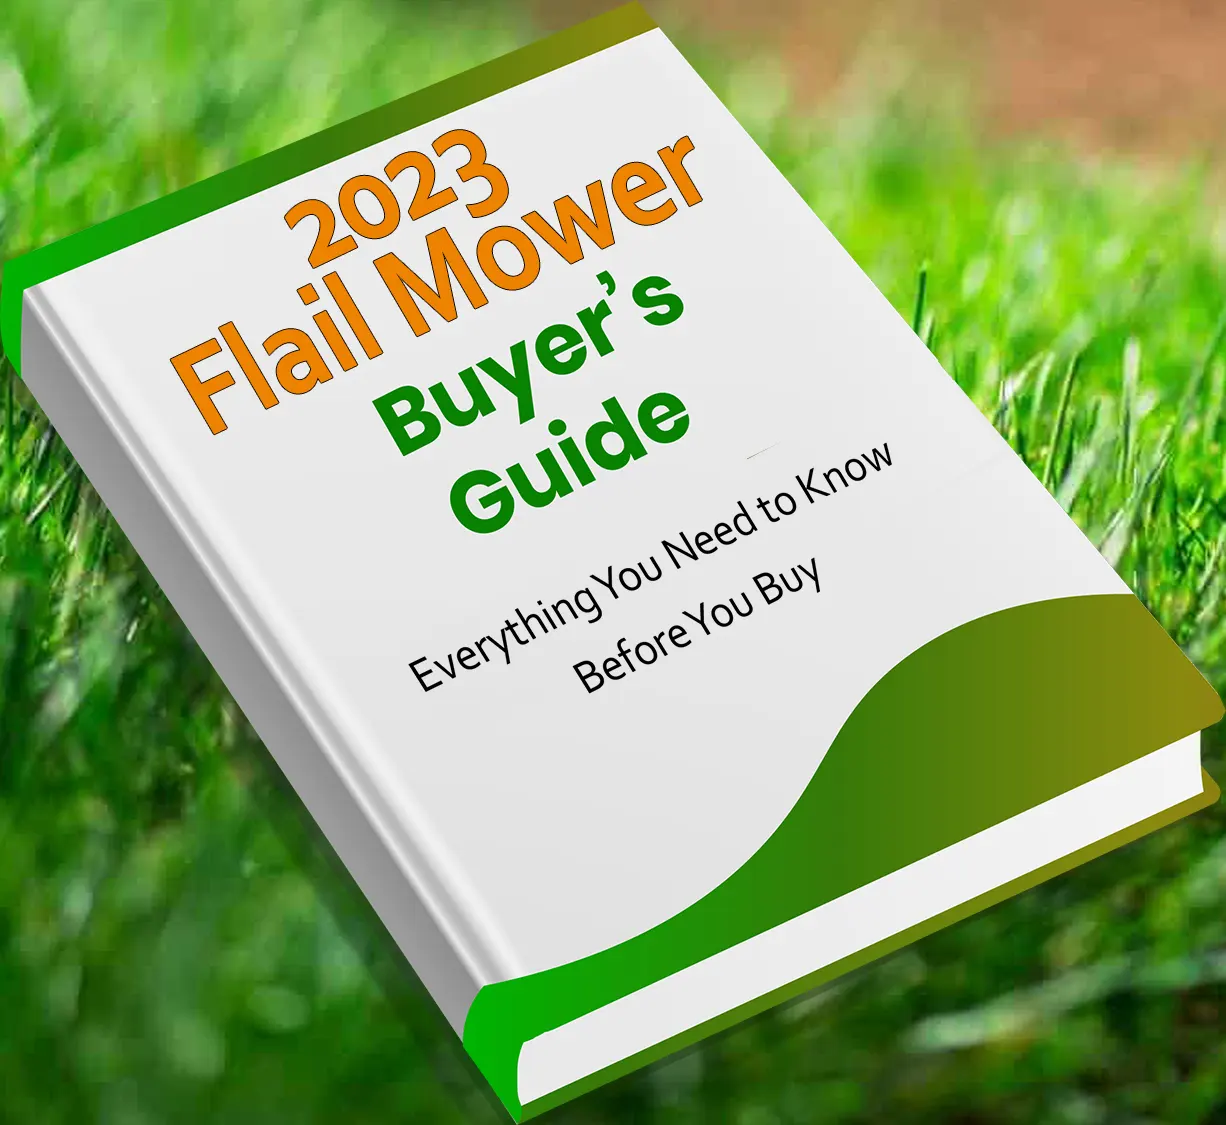 2023 flail mower buyers guide